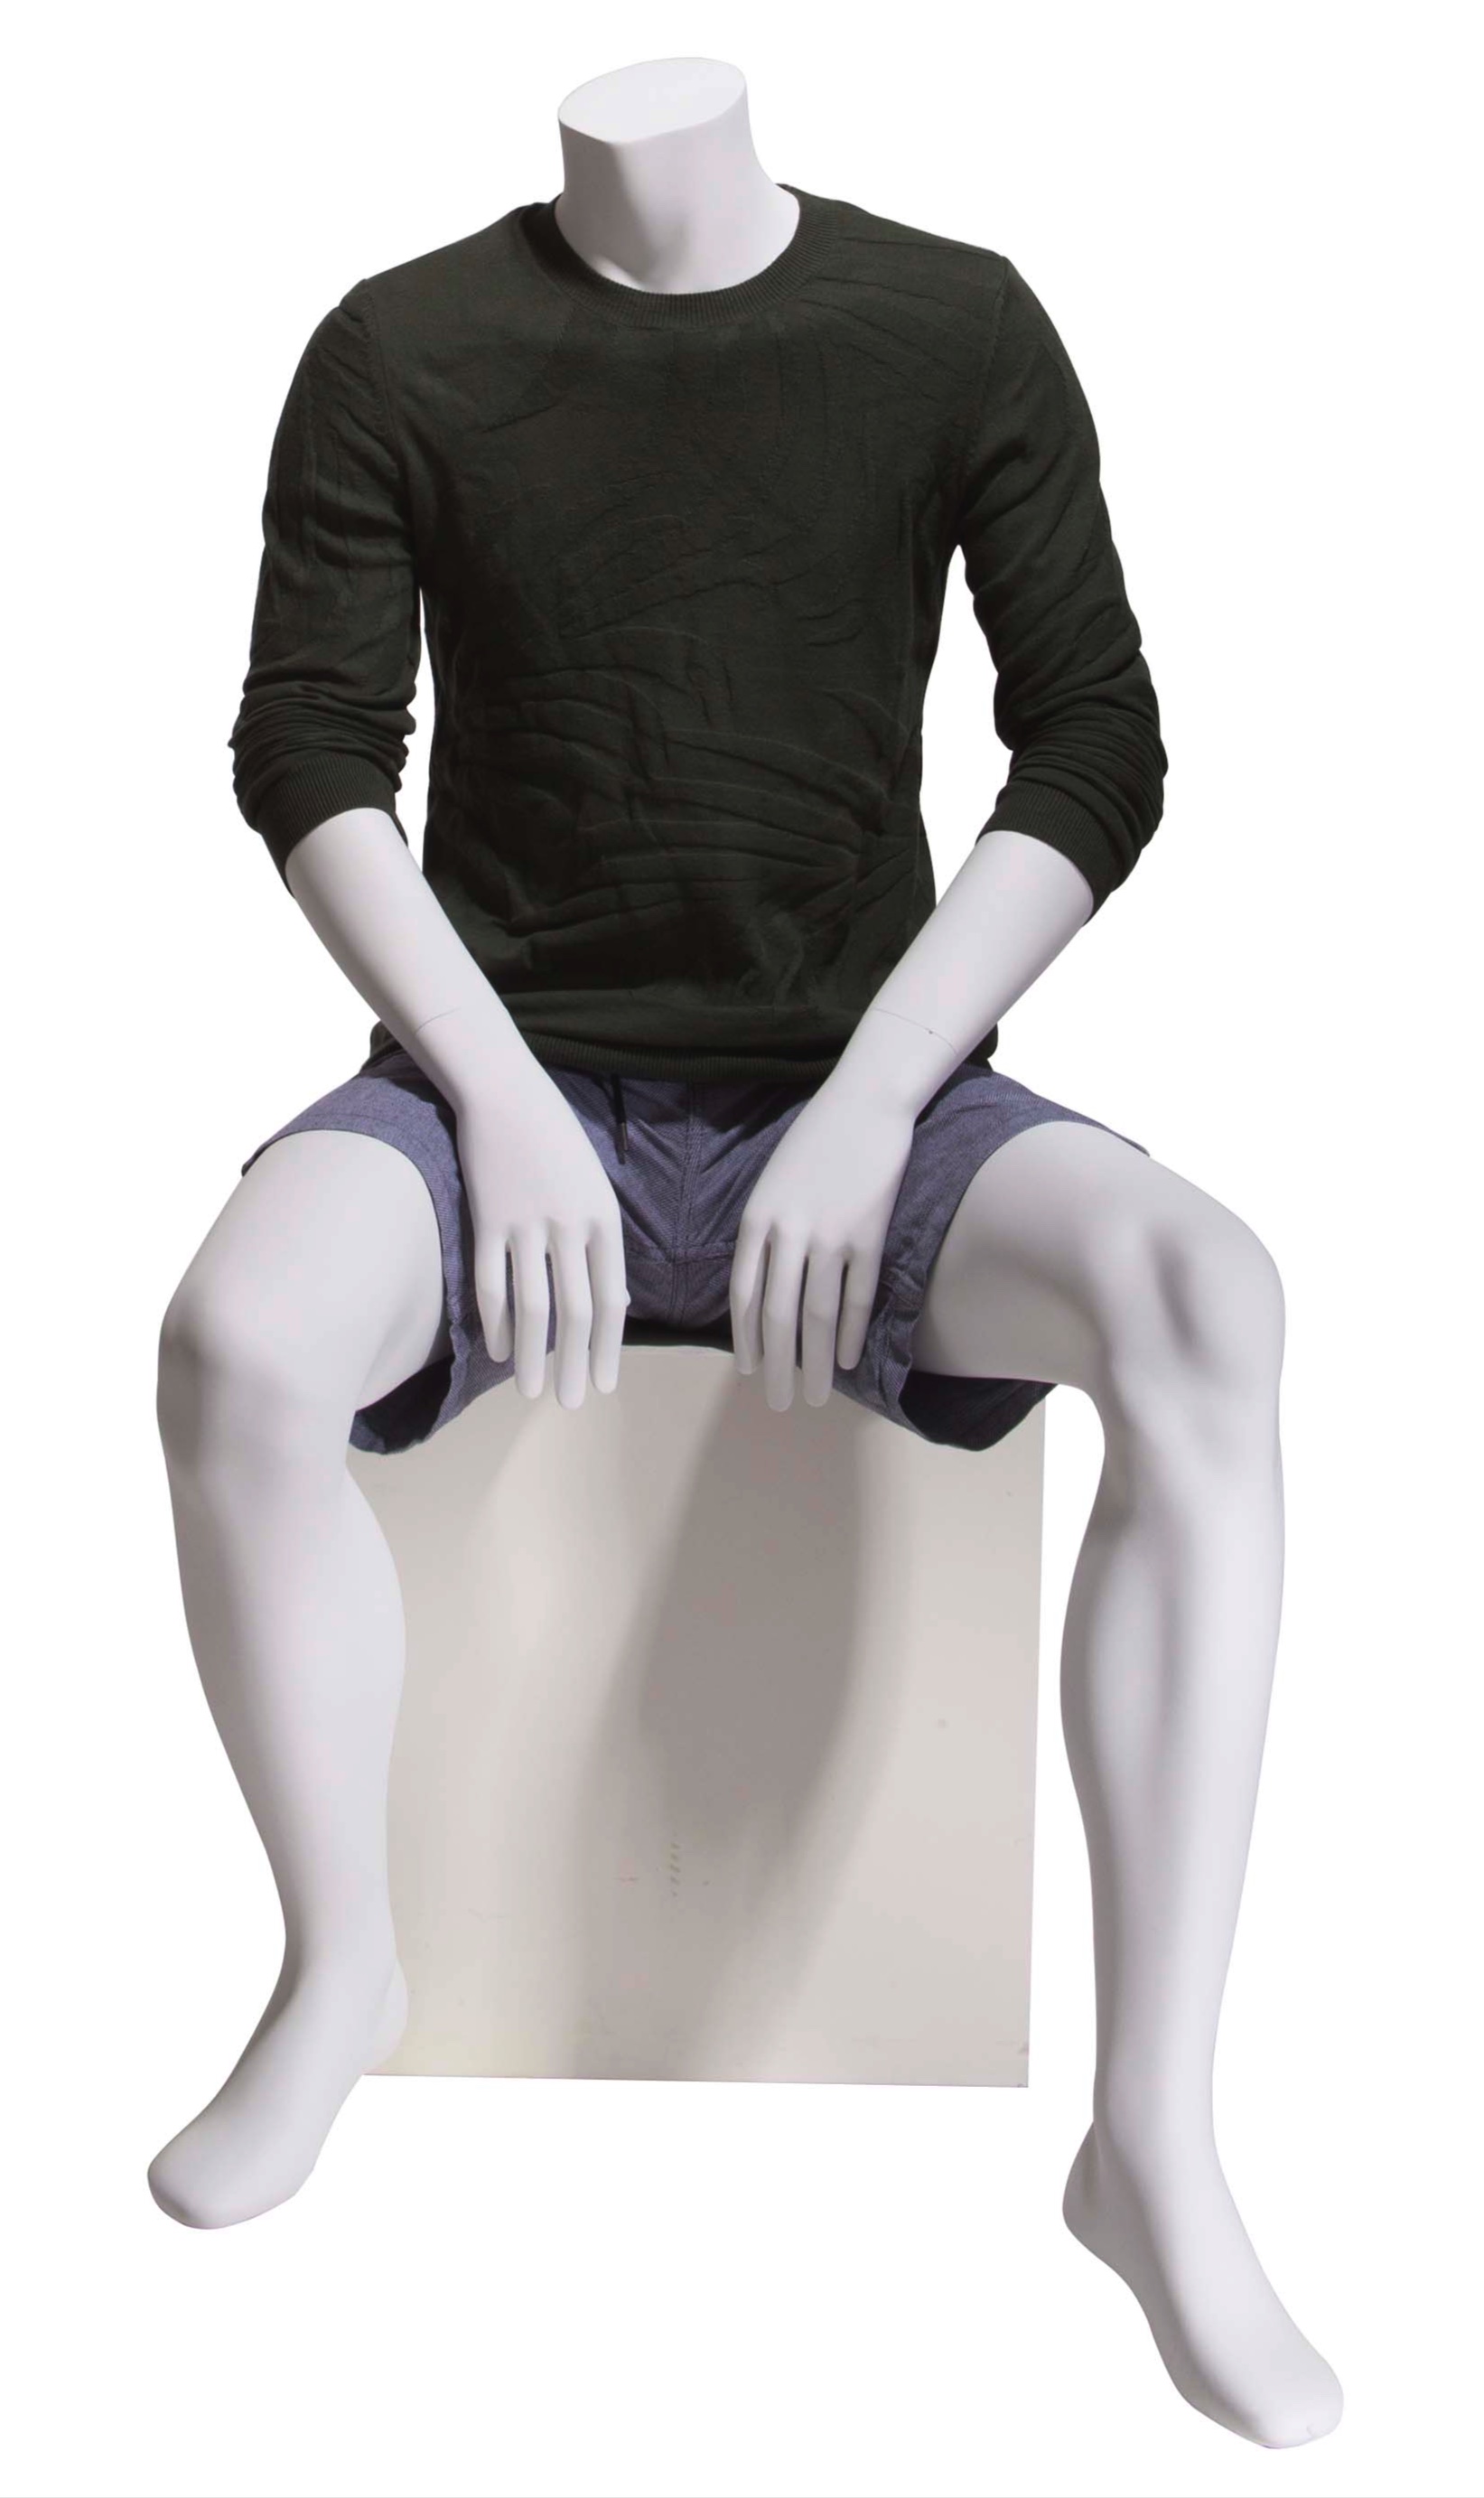 Tomas Headless Seated Male Mannequin 1779